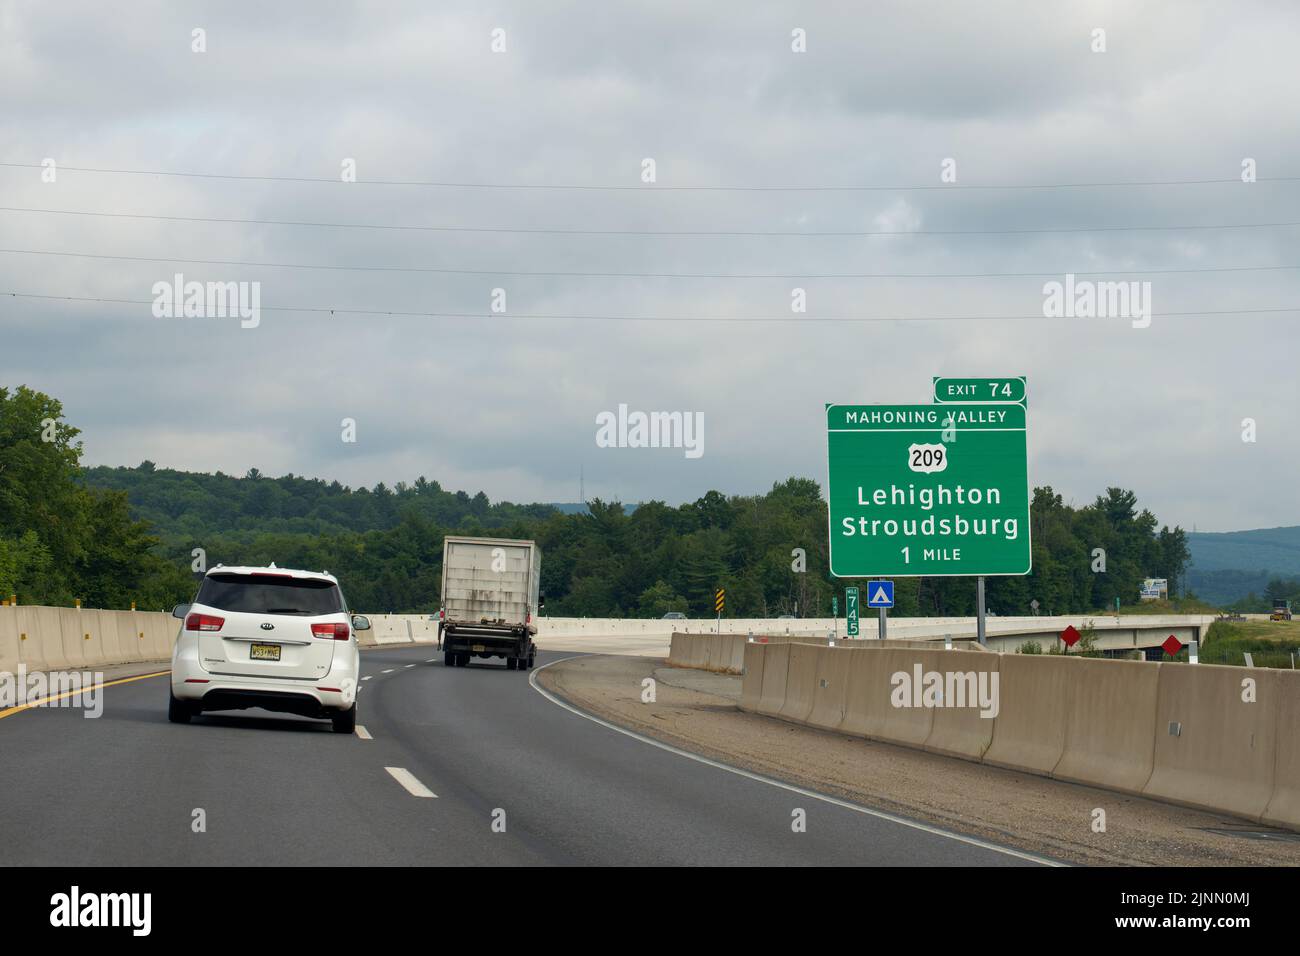 Lehighton, PA - July 28, 2022: Mahoning Valley Exit 74 sign on the Northeast Extension of the Pennsylvania Turnpike for Lehighton and Stroudsburg Rout Stock Photo